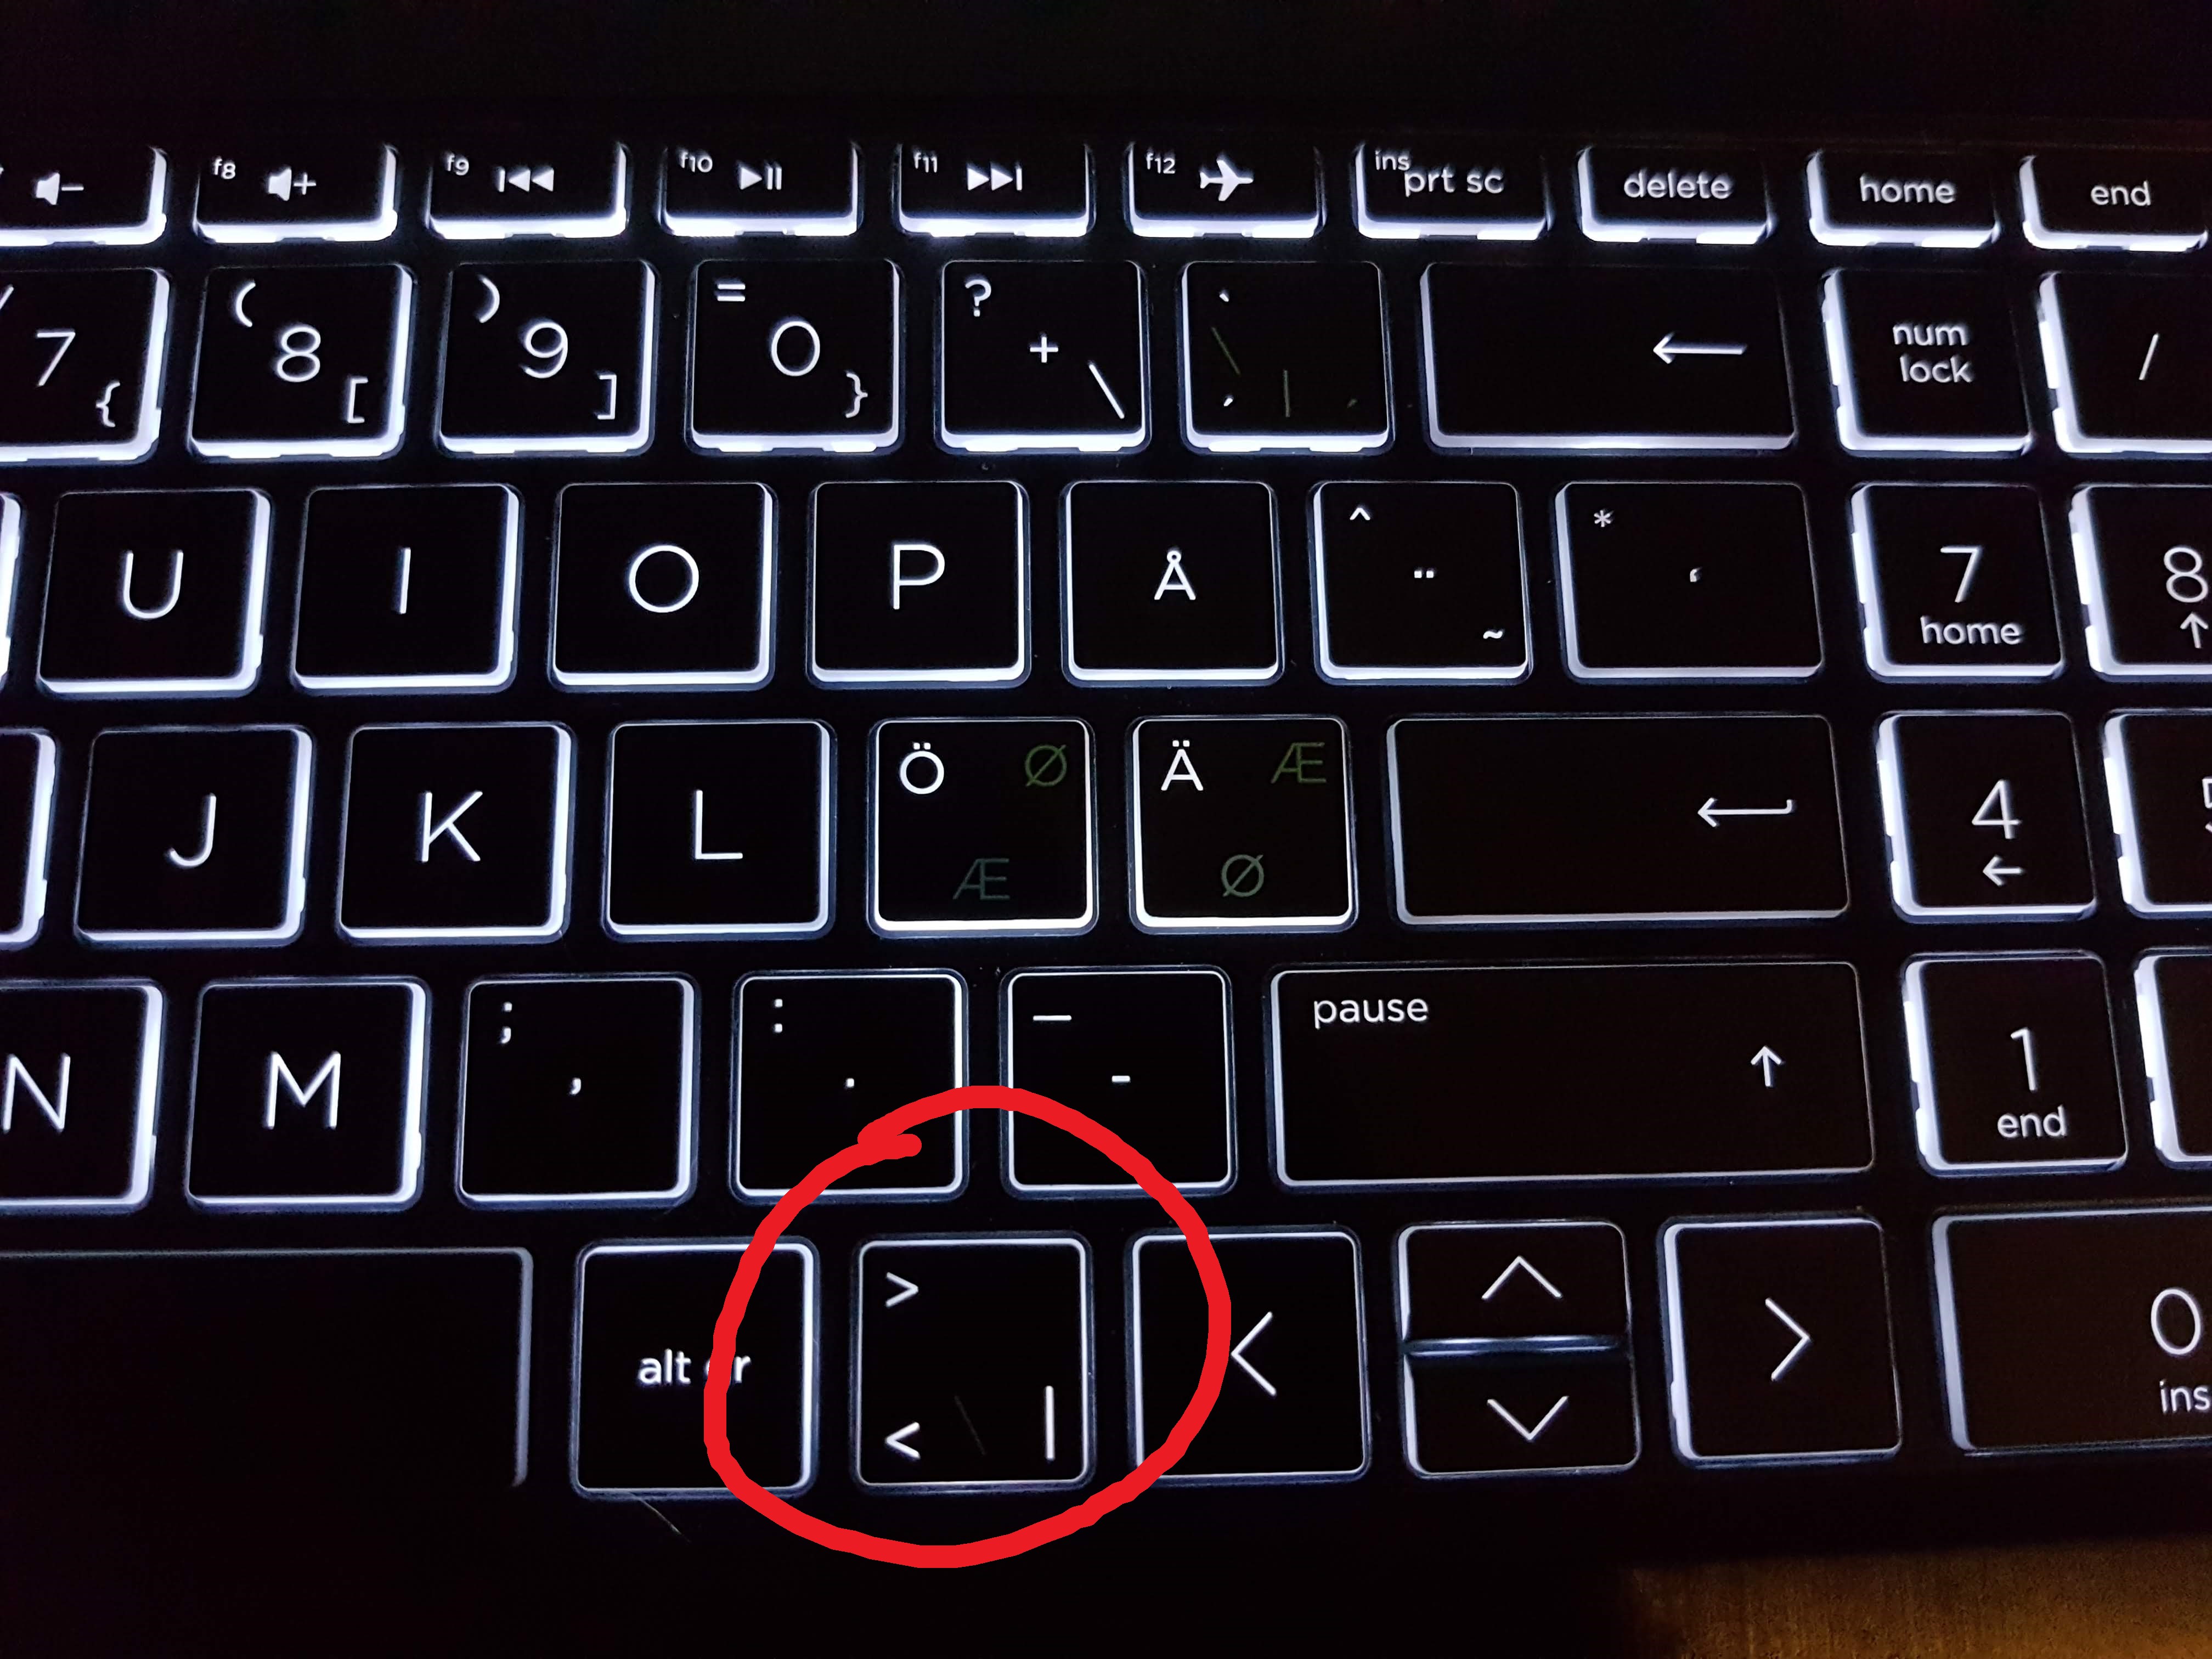 Solved: The greater than/less than signs "<" and ">" key replaced